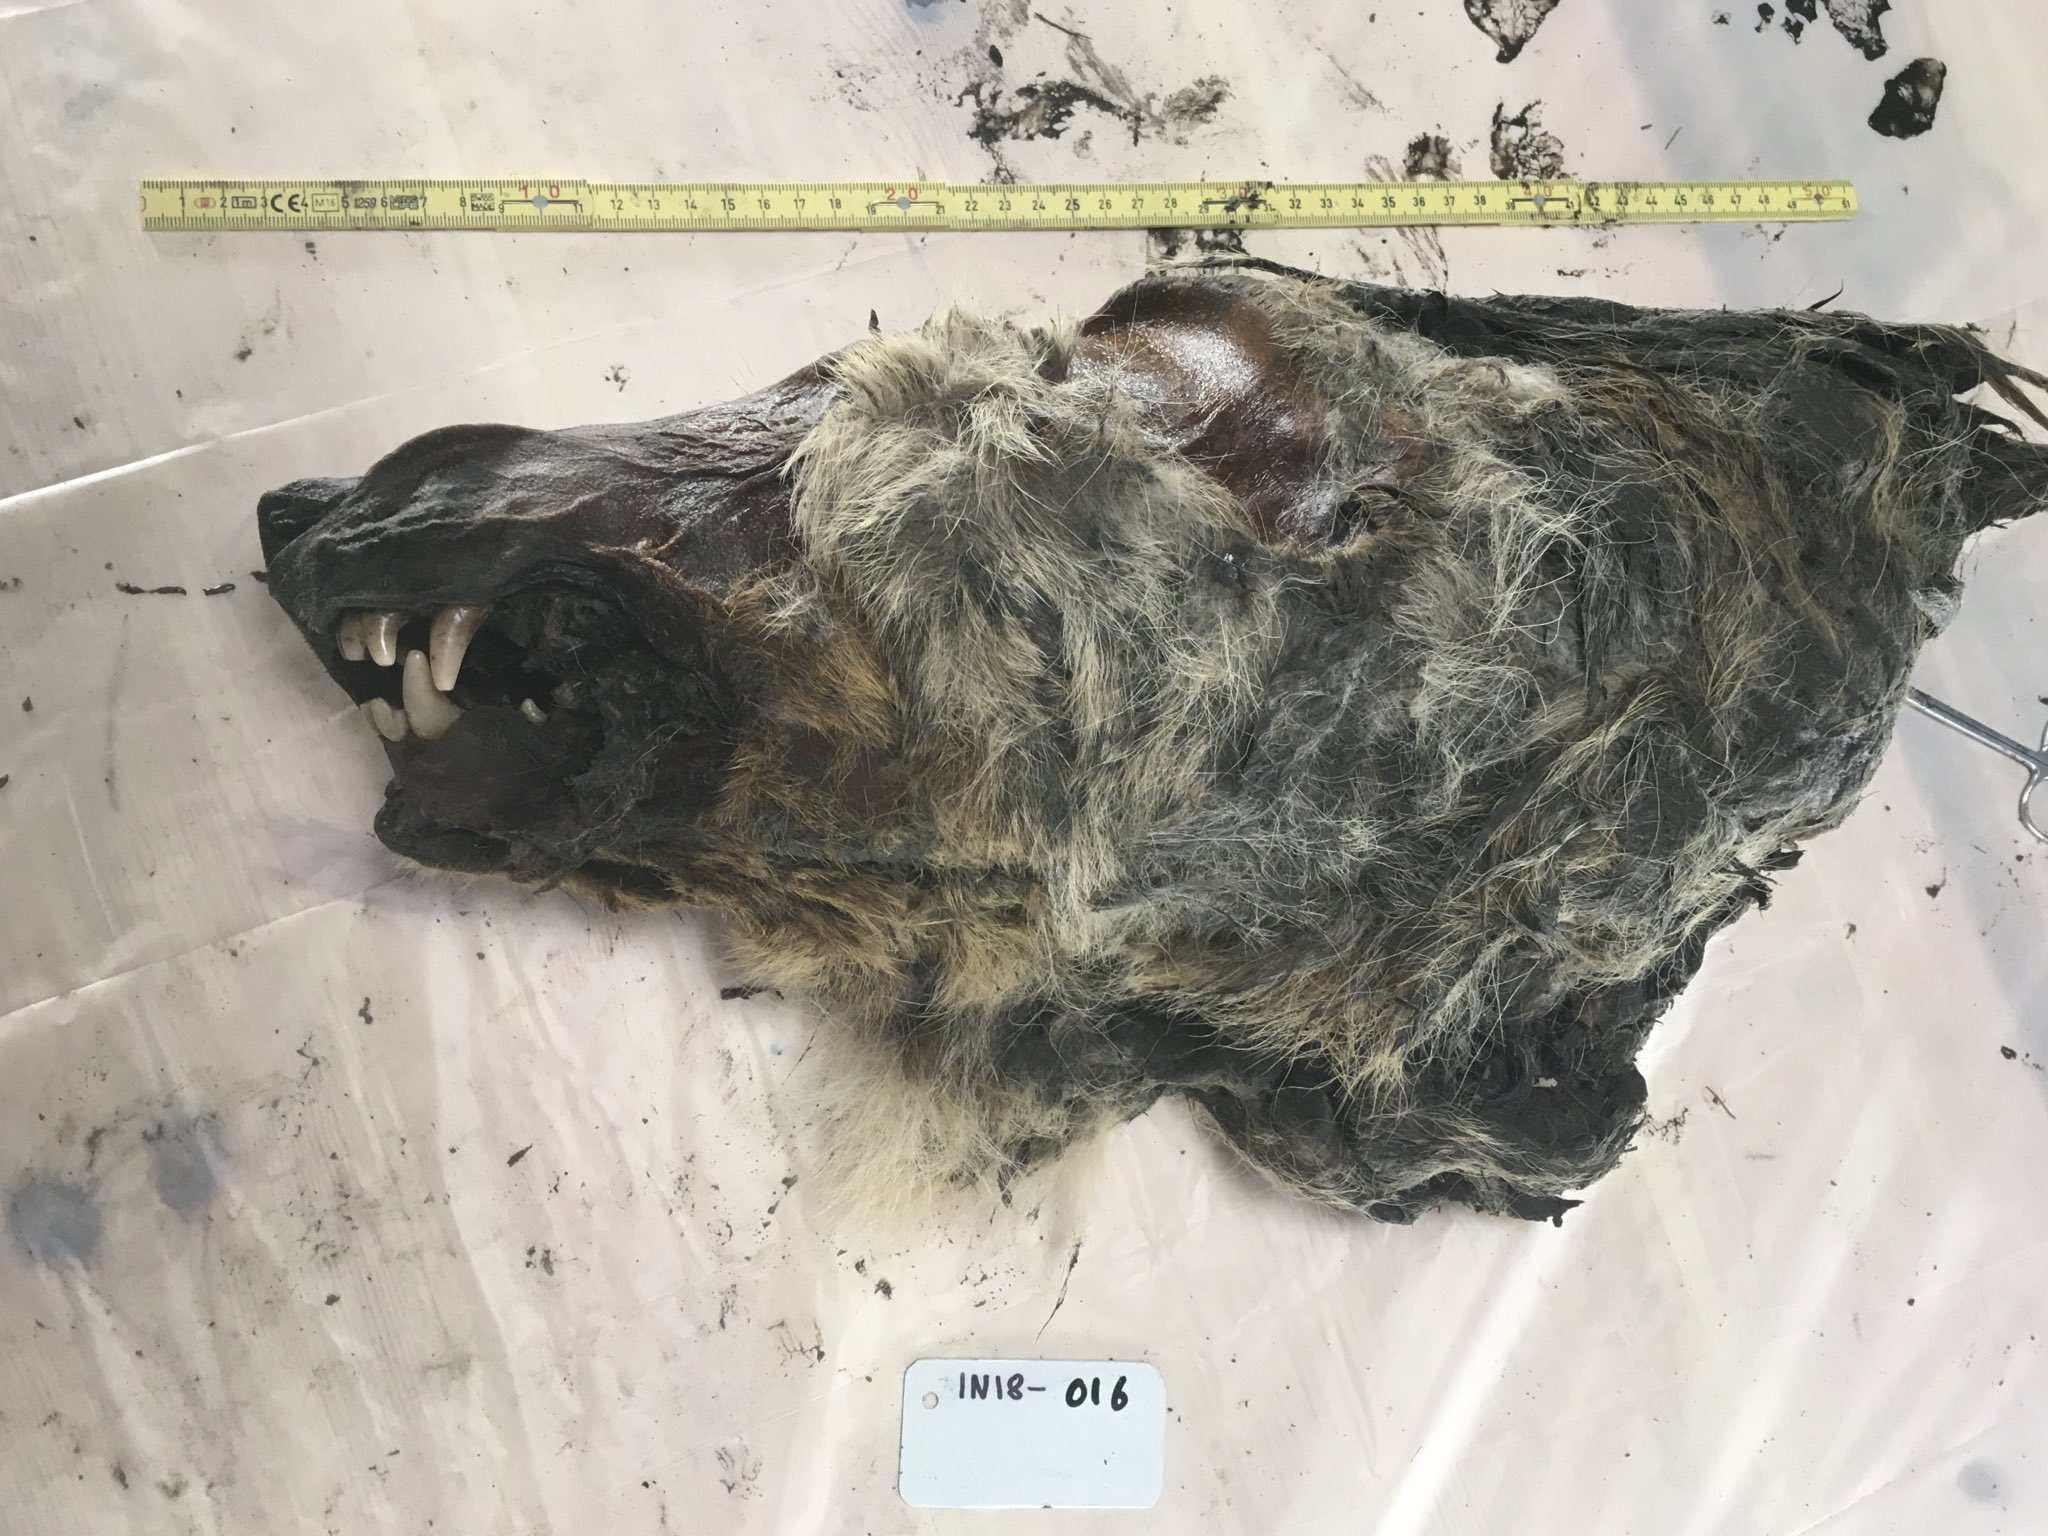 A perfectly preserved 32,000-year-old wolf head was found in Siberian permafrost 3